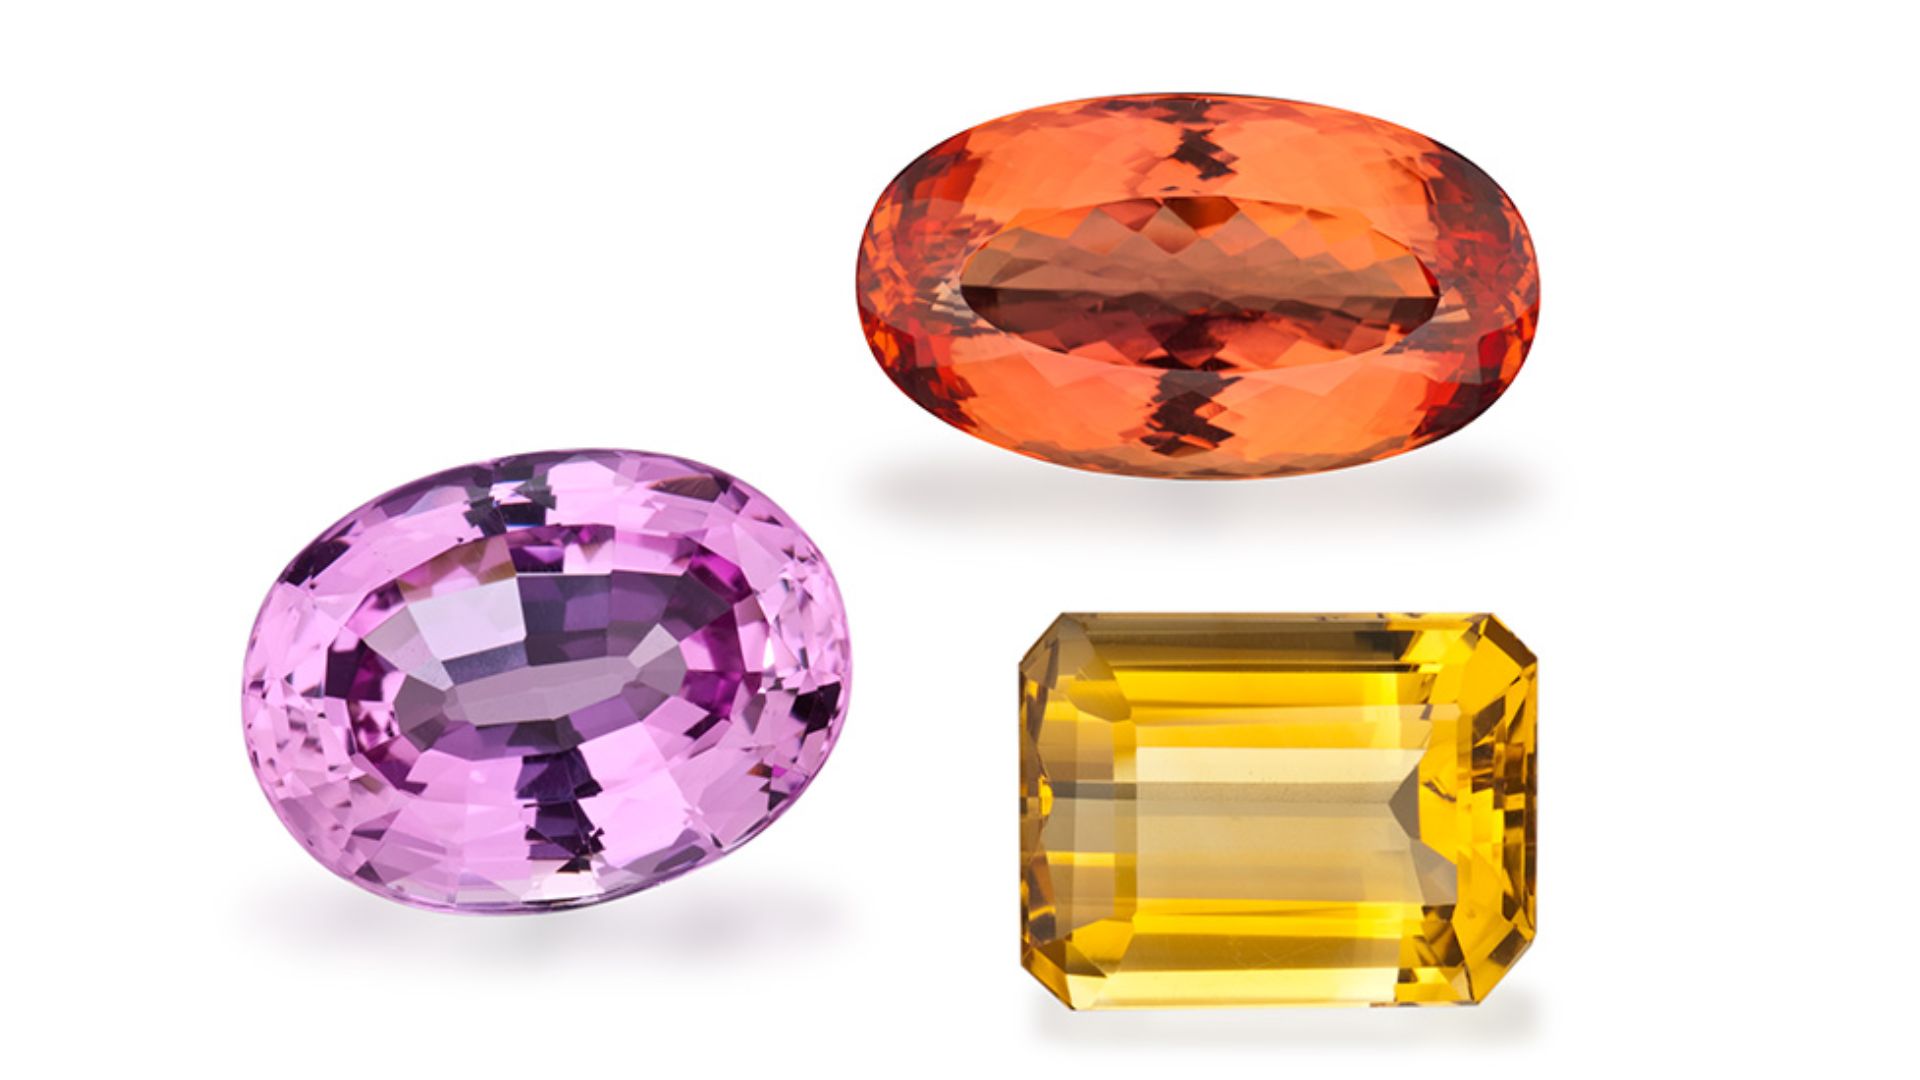 What Is The Birthstone For November?